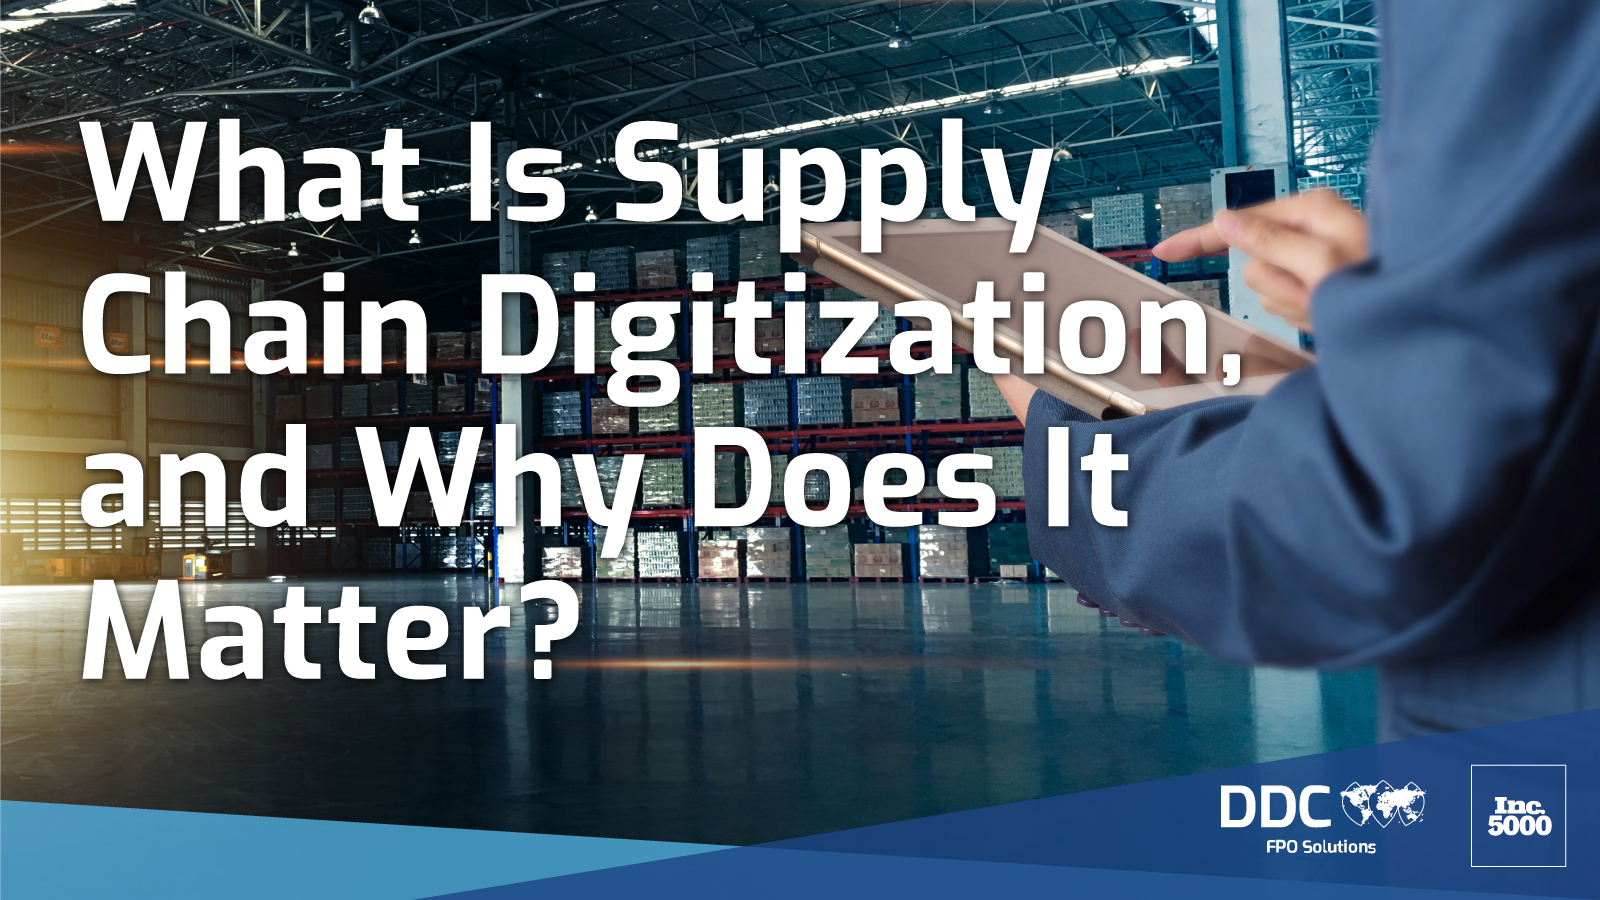 What Is Supply Chain Digitization, and Why Does It Matter?